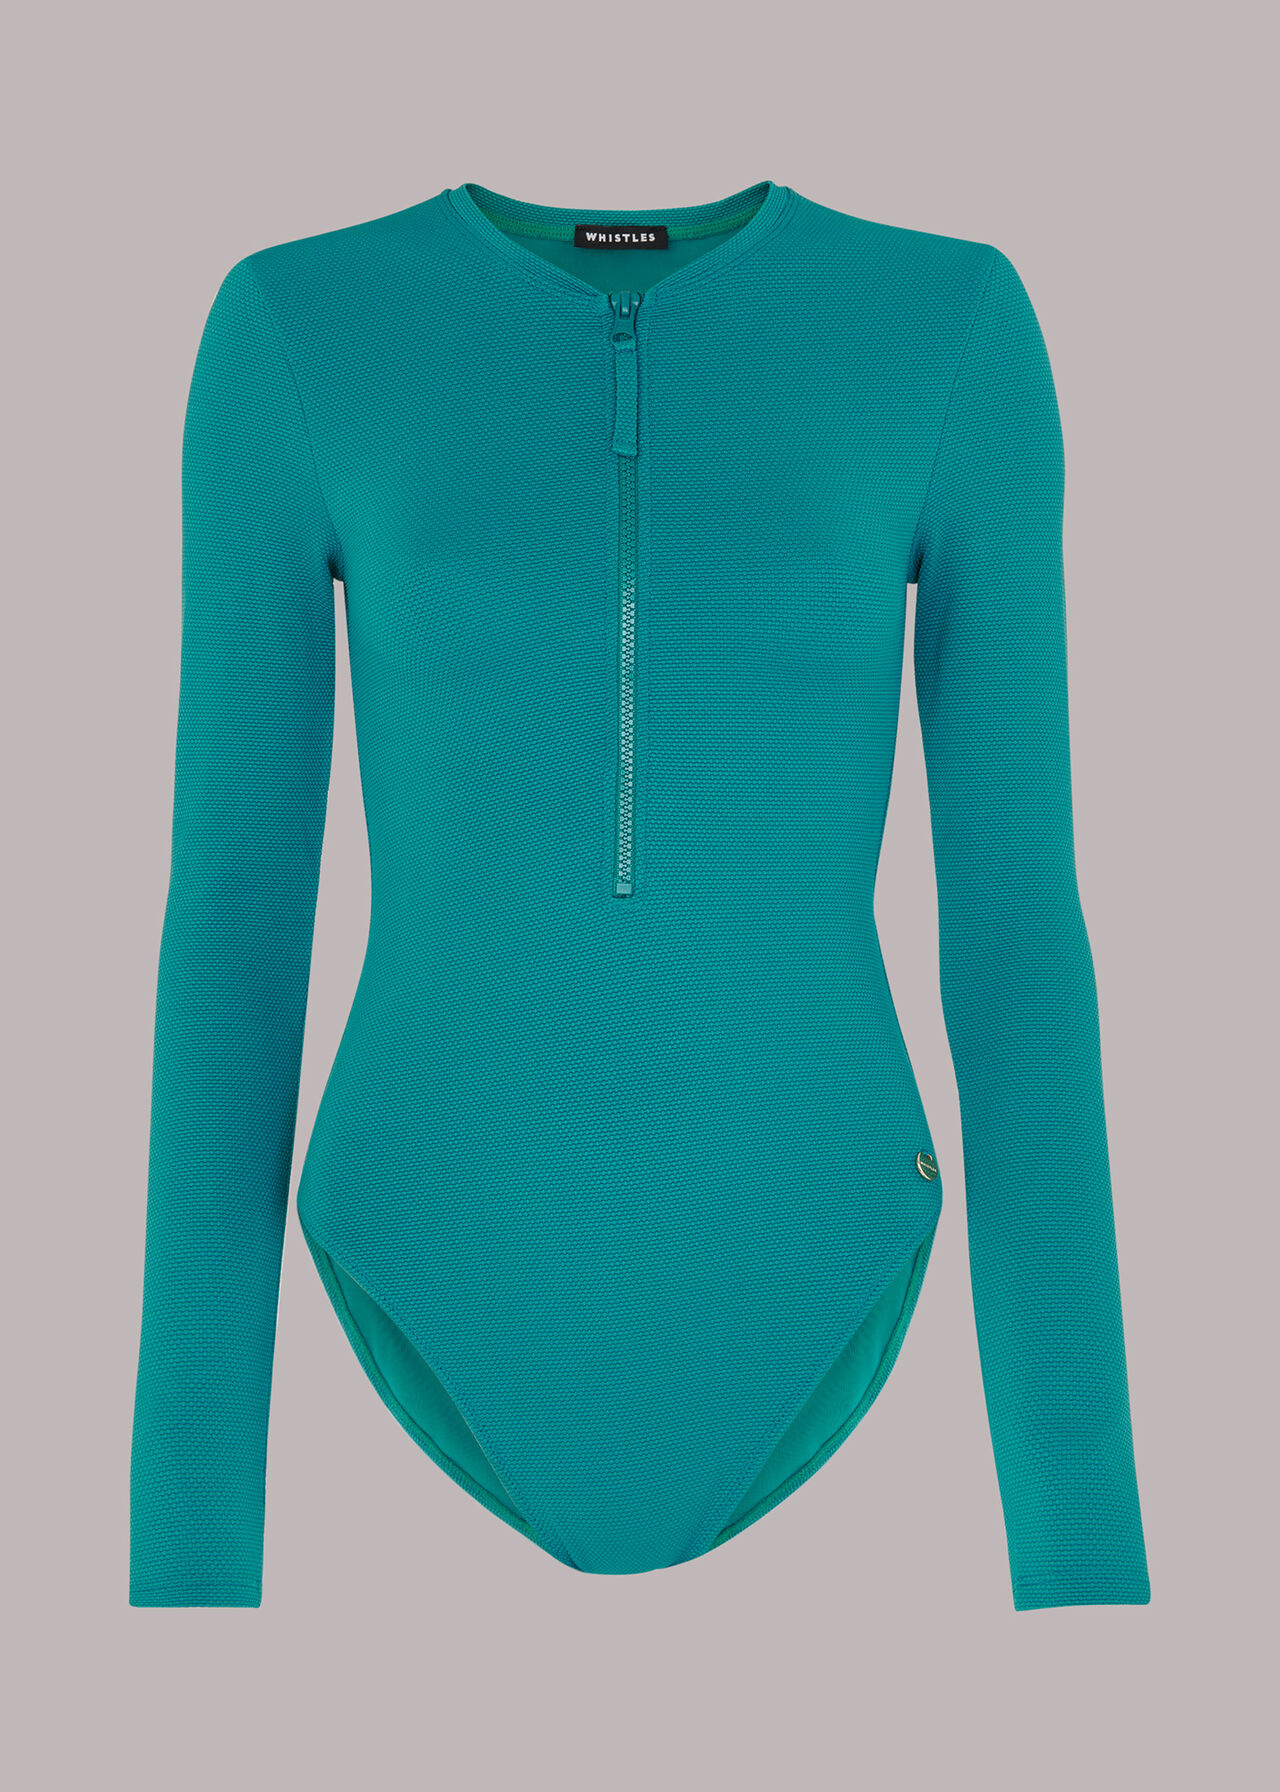 Teal Long Sleeve Texture Swimsuit, WHISTLES